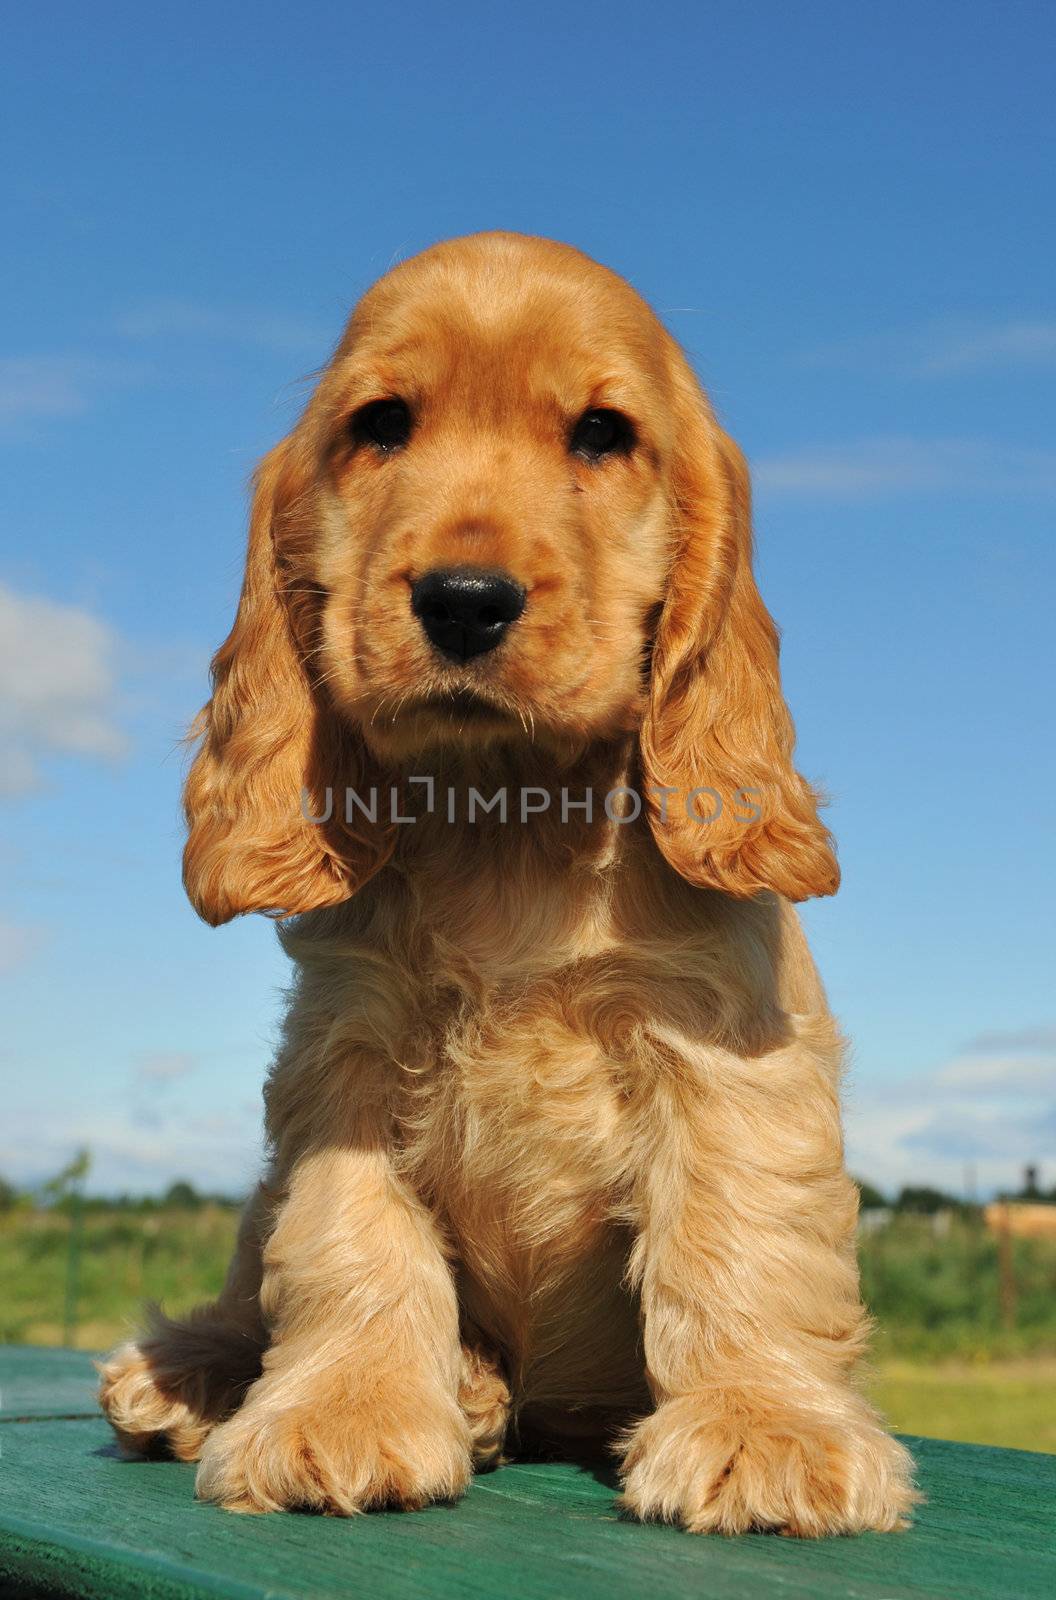 young puppy purebred english cocker sitting outdoor